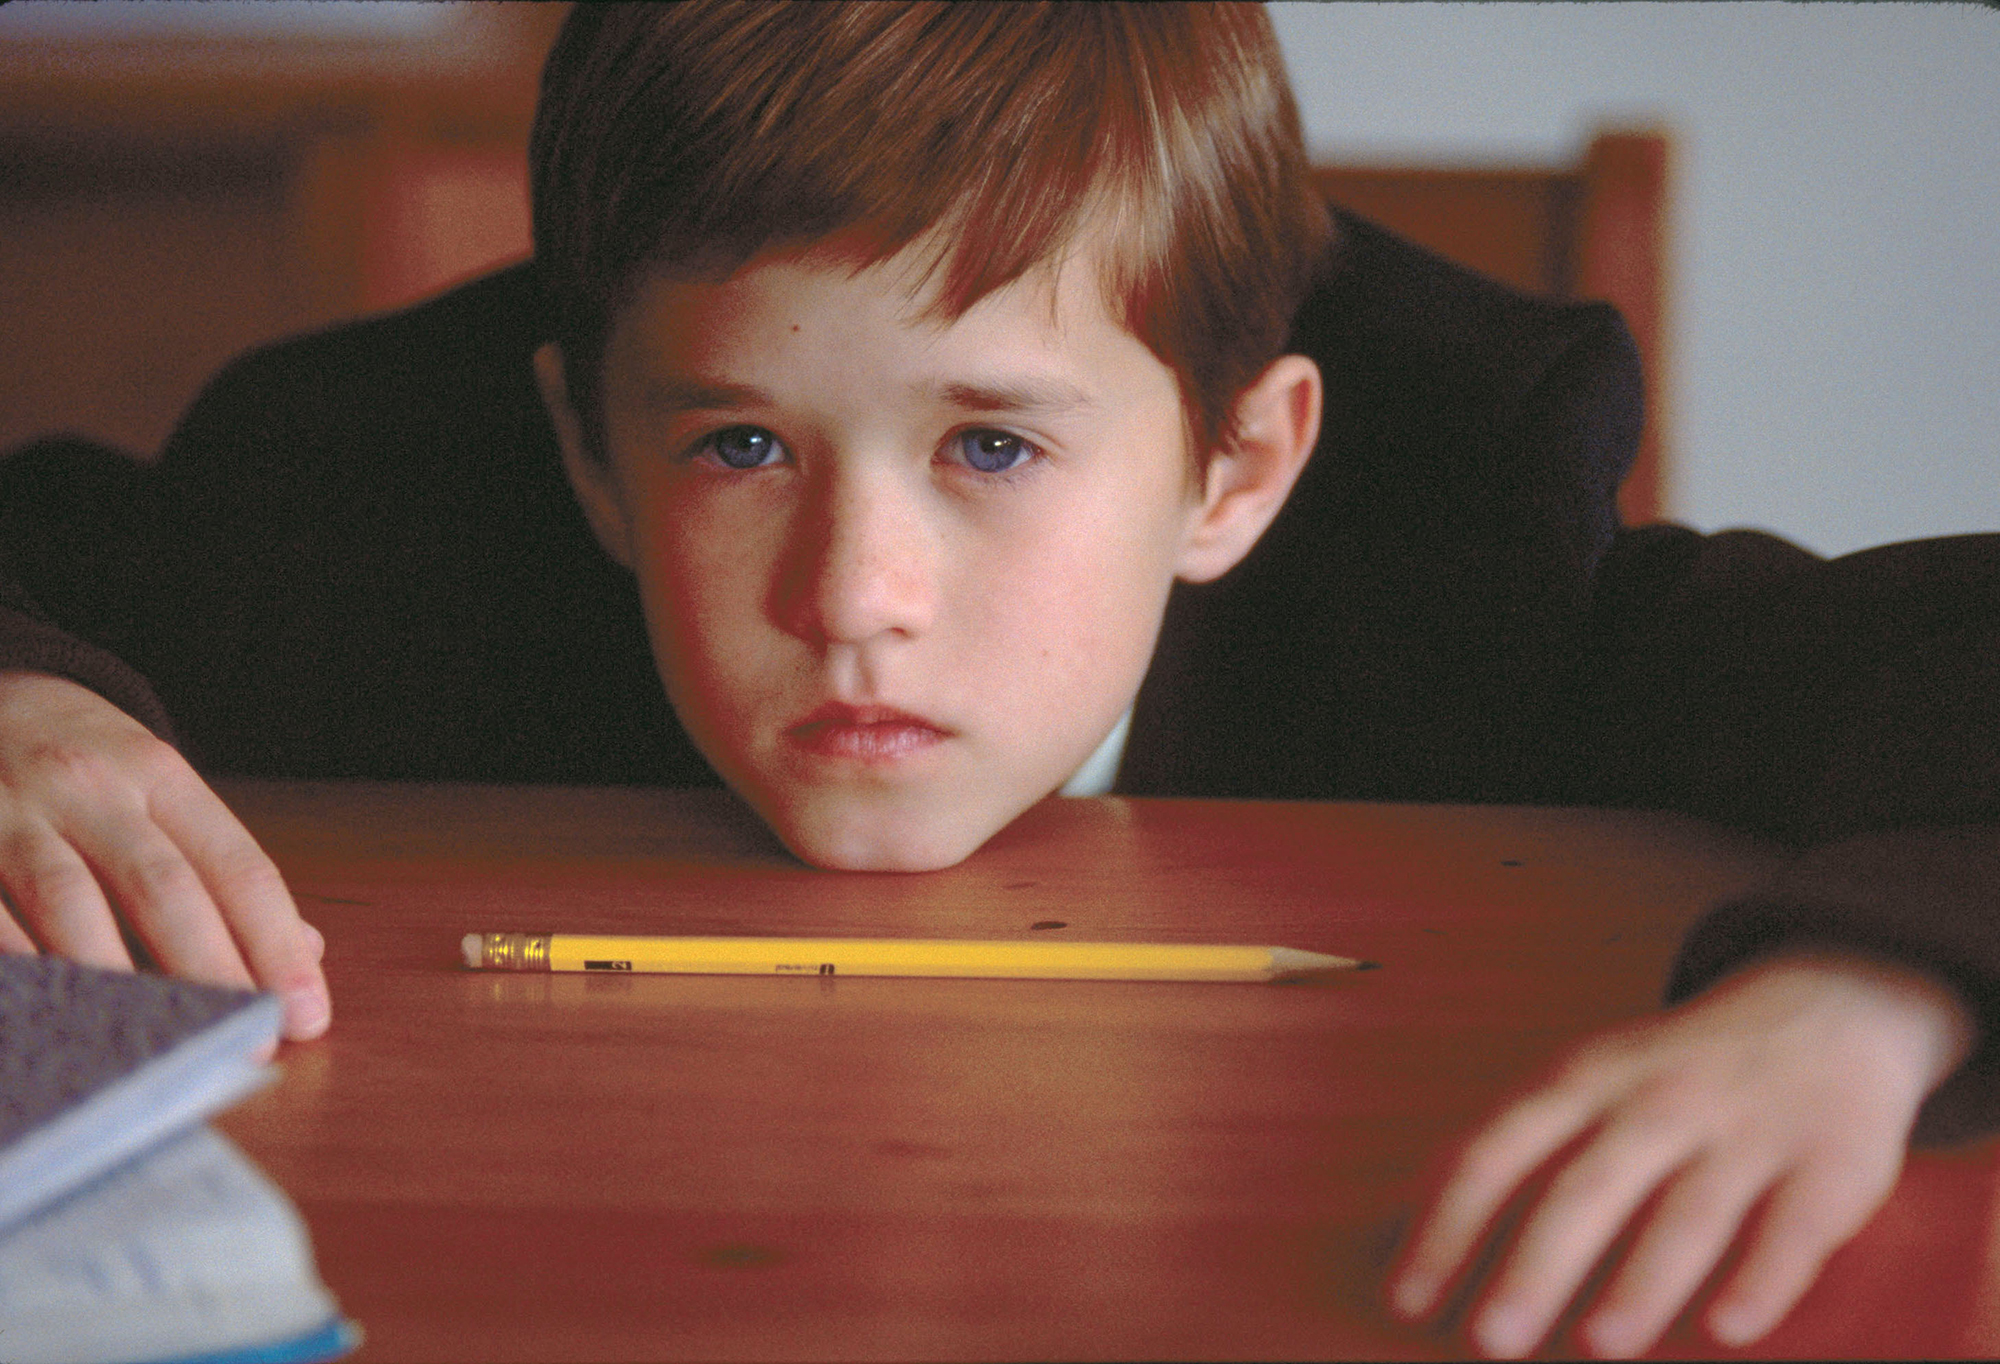 What Ever Happened to Haley Joel Osment, Kid From 'The Sixth Sense